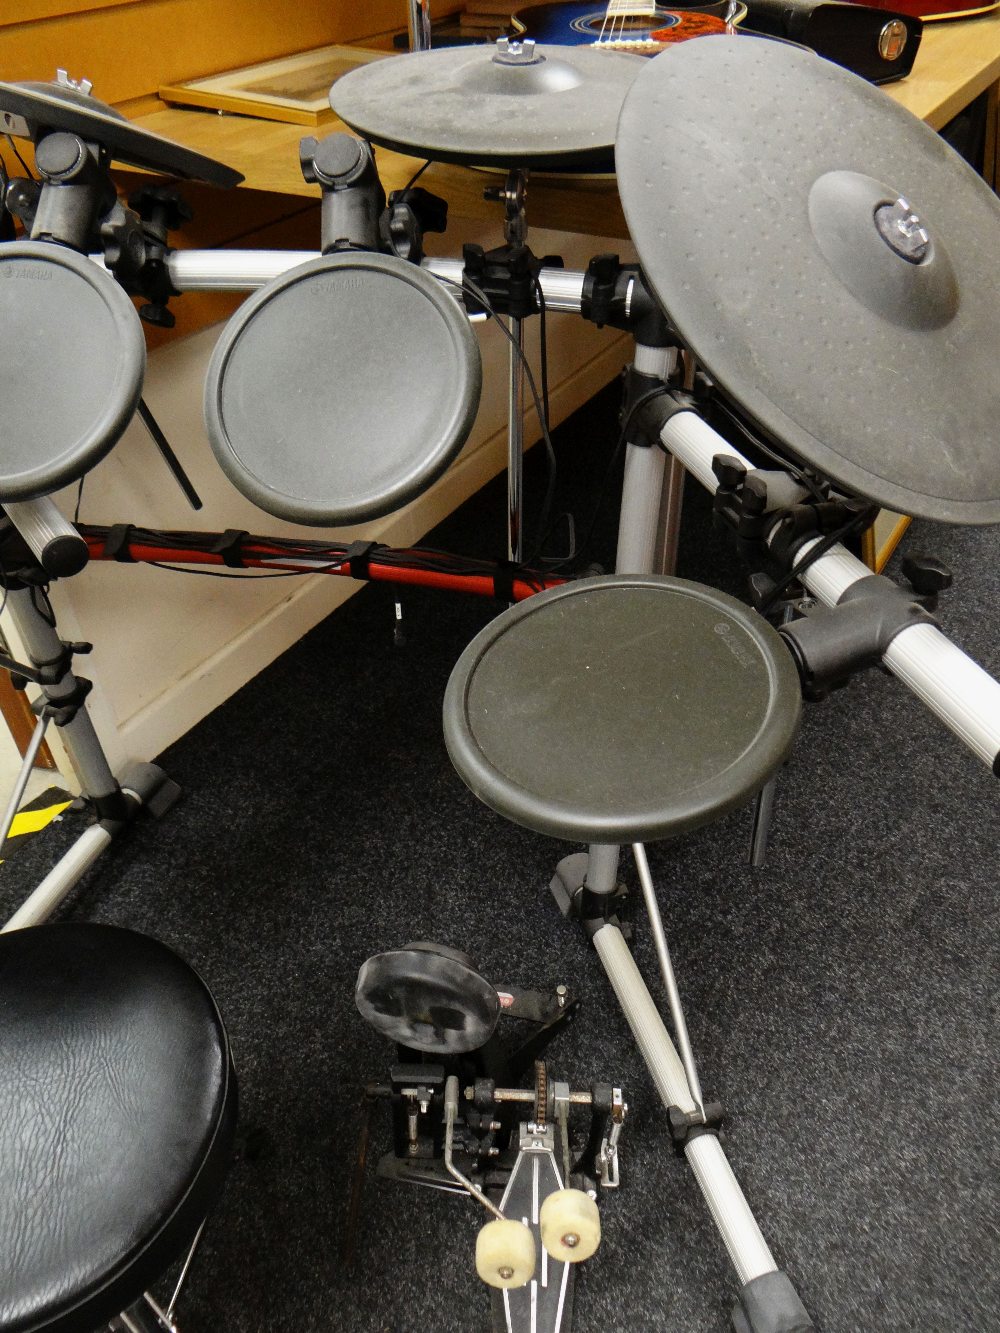 YAMAHA DTXPRESS III ELECTRONIC DRUM KIT, three drums pads, three cymbal pads, high hat cymbal pad - Image 3 of 4